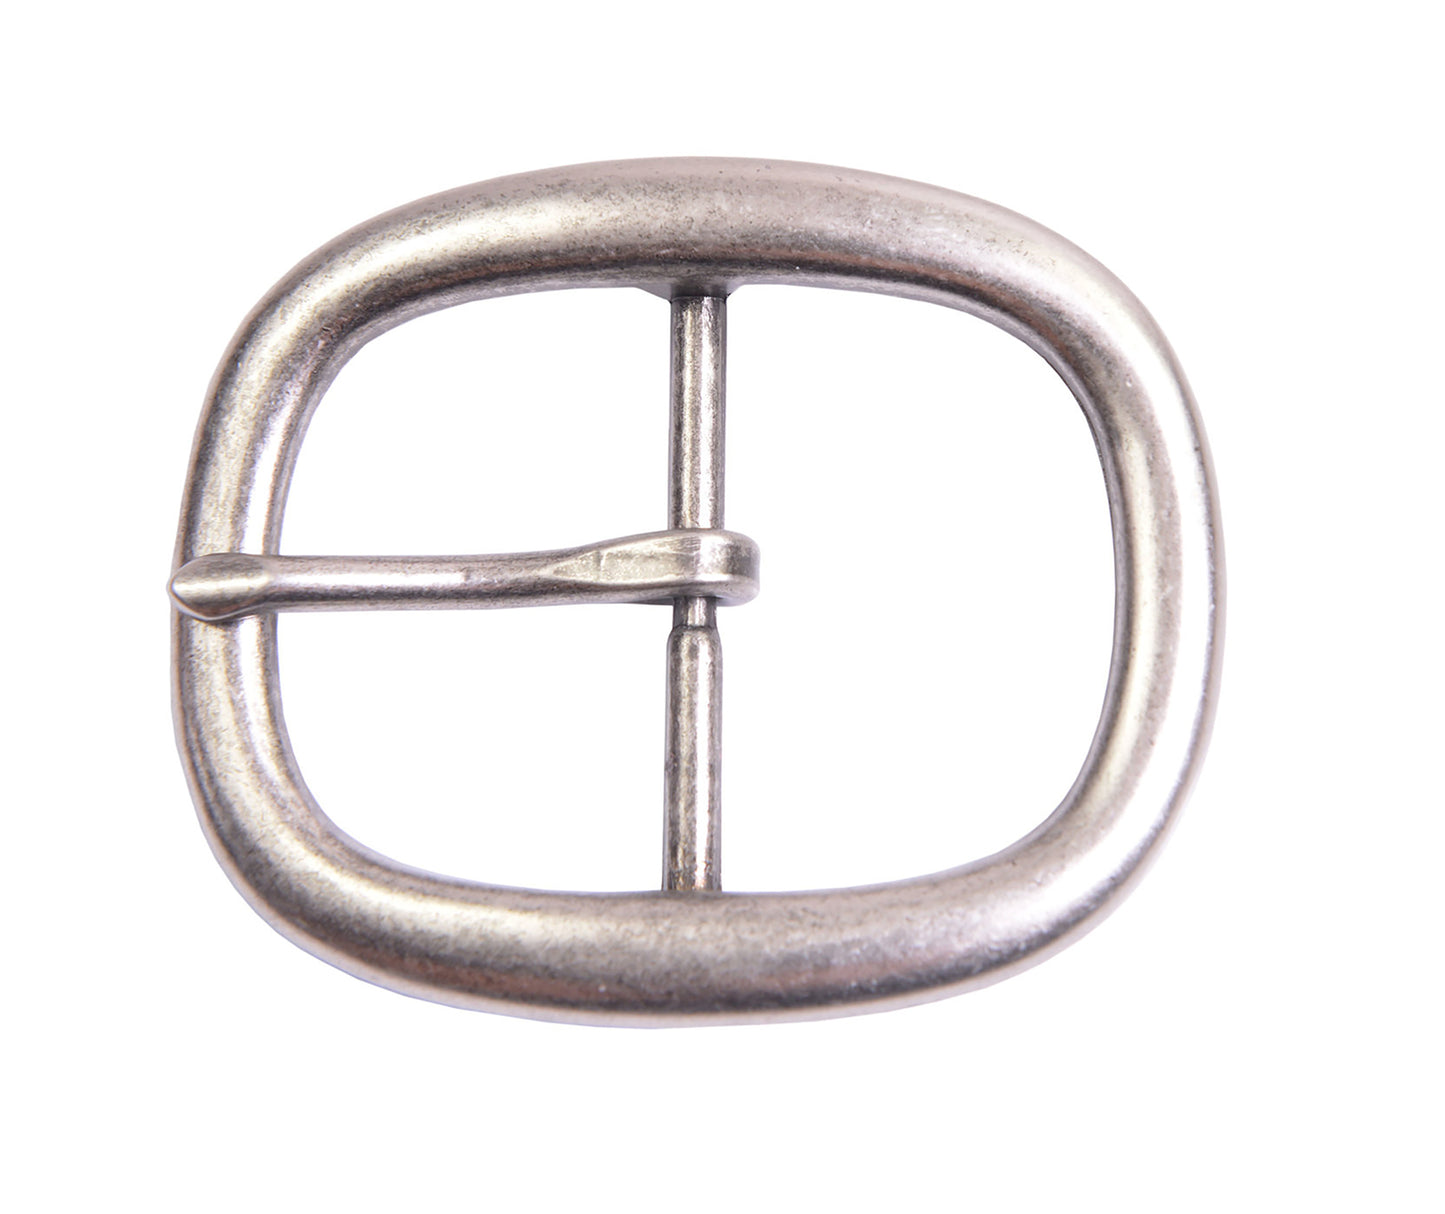 TBS-P6393 Antique Silver Oval Center Bar Buckle - Fits 1.5" or 38mm Belts